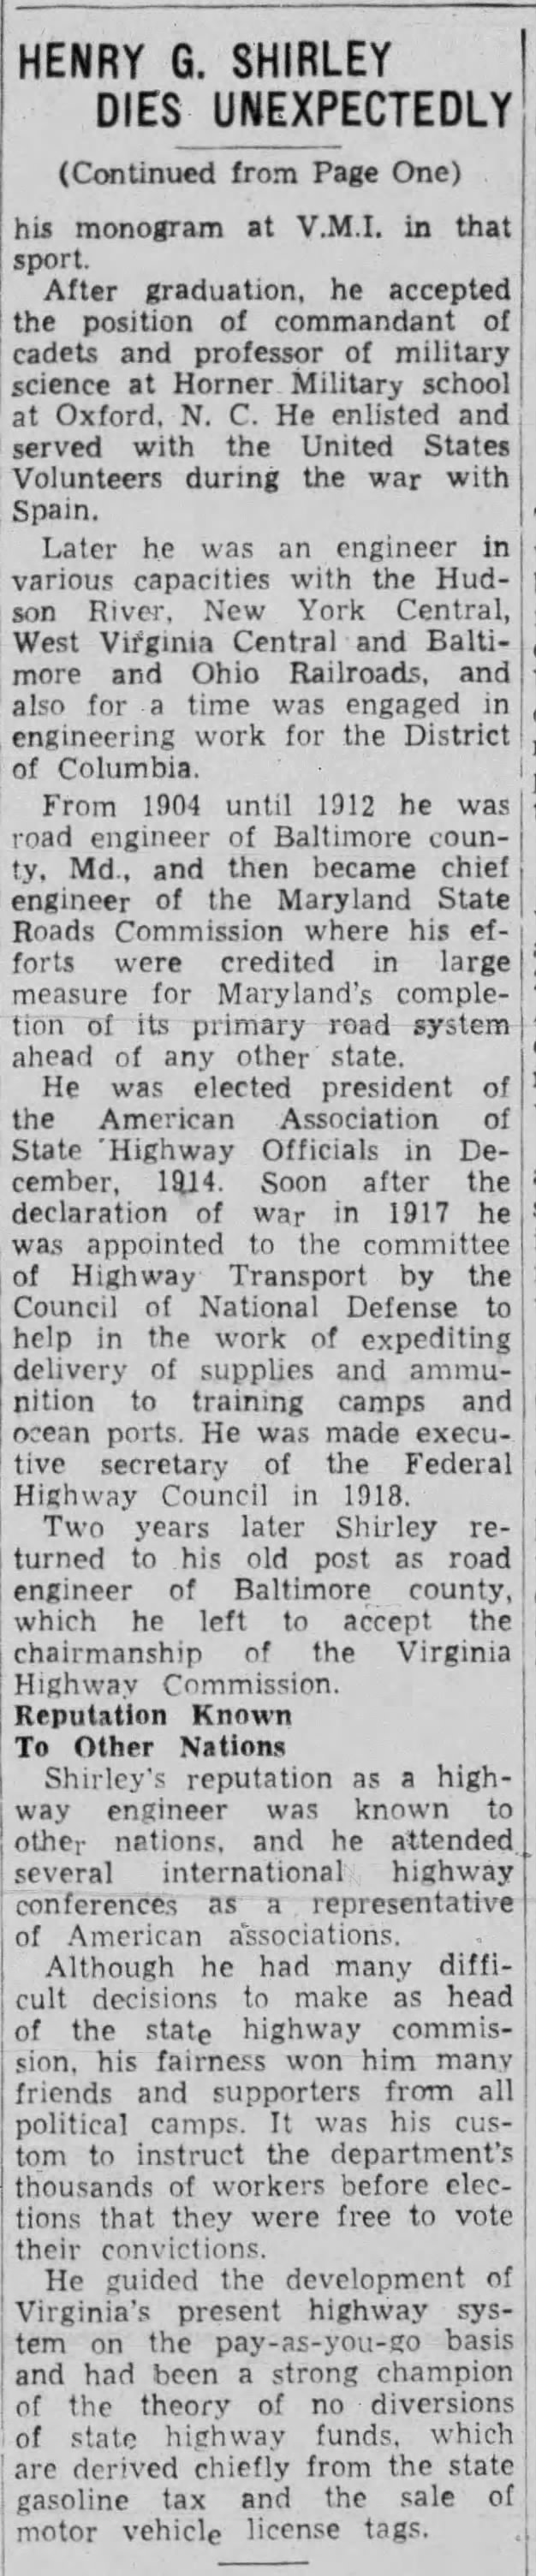 Henry G. Shirley Dies Unexpectedly; 17 Jul 1941; The Bristol Herald Courier; 2